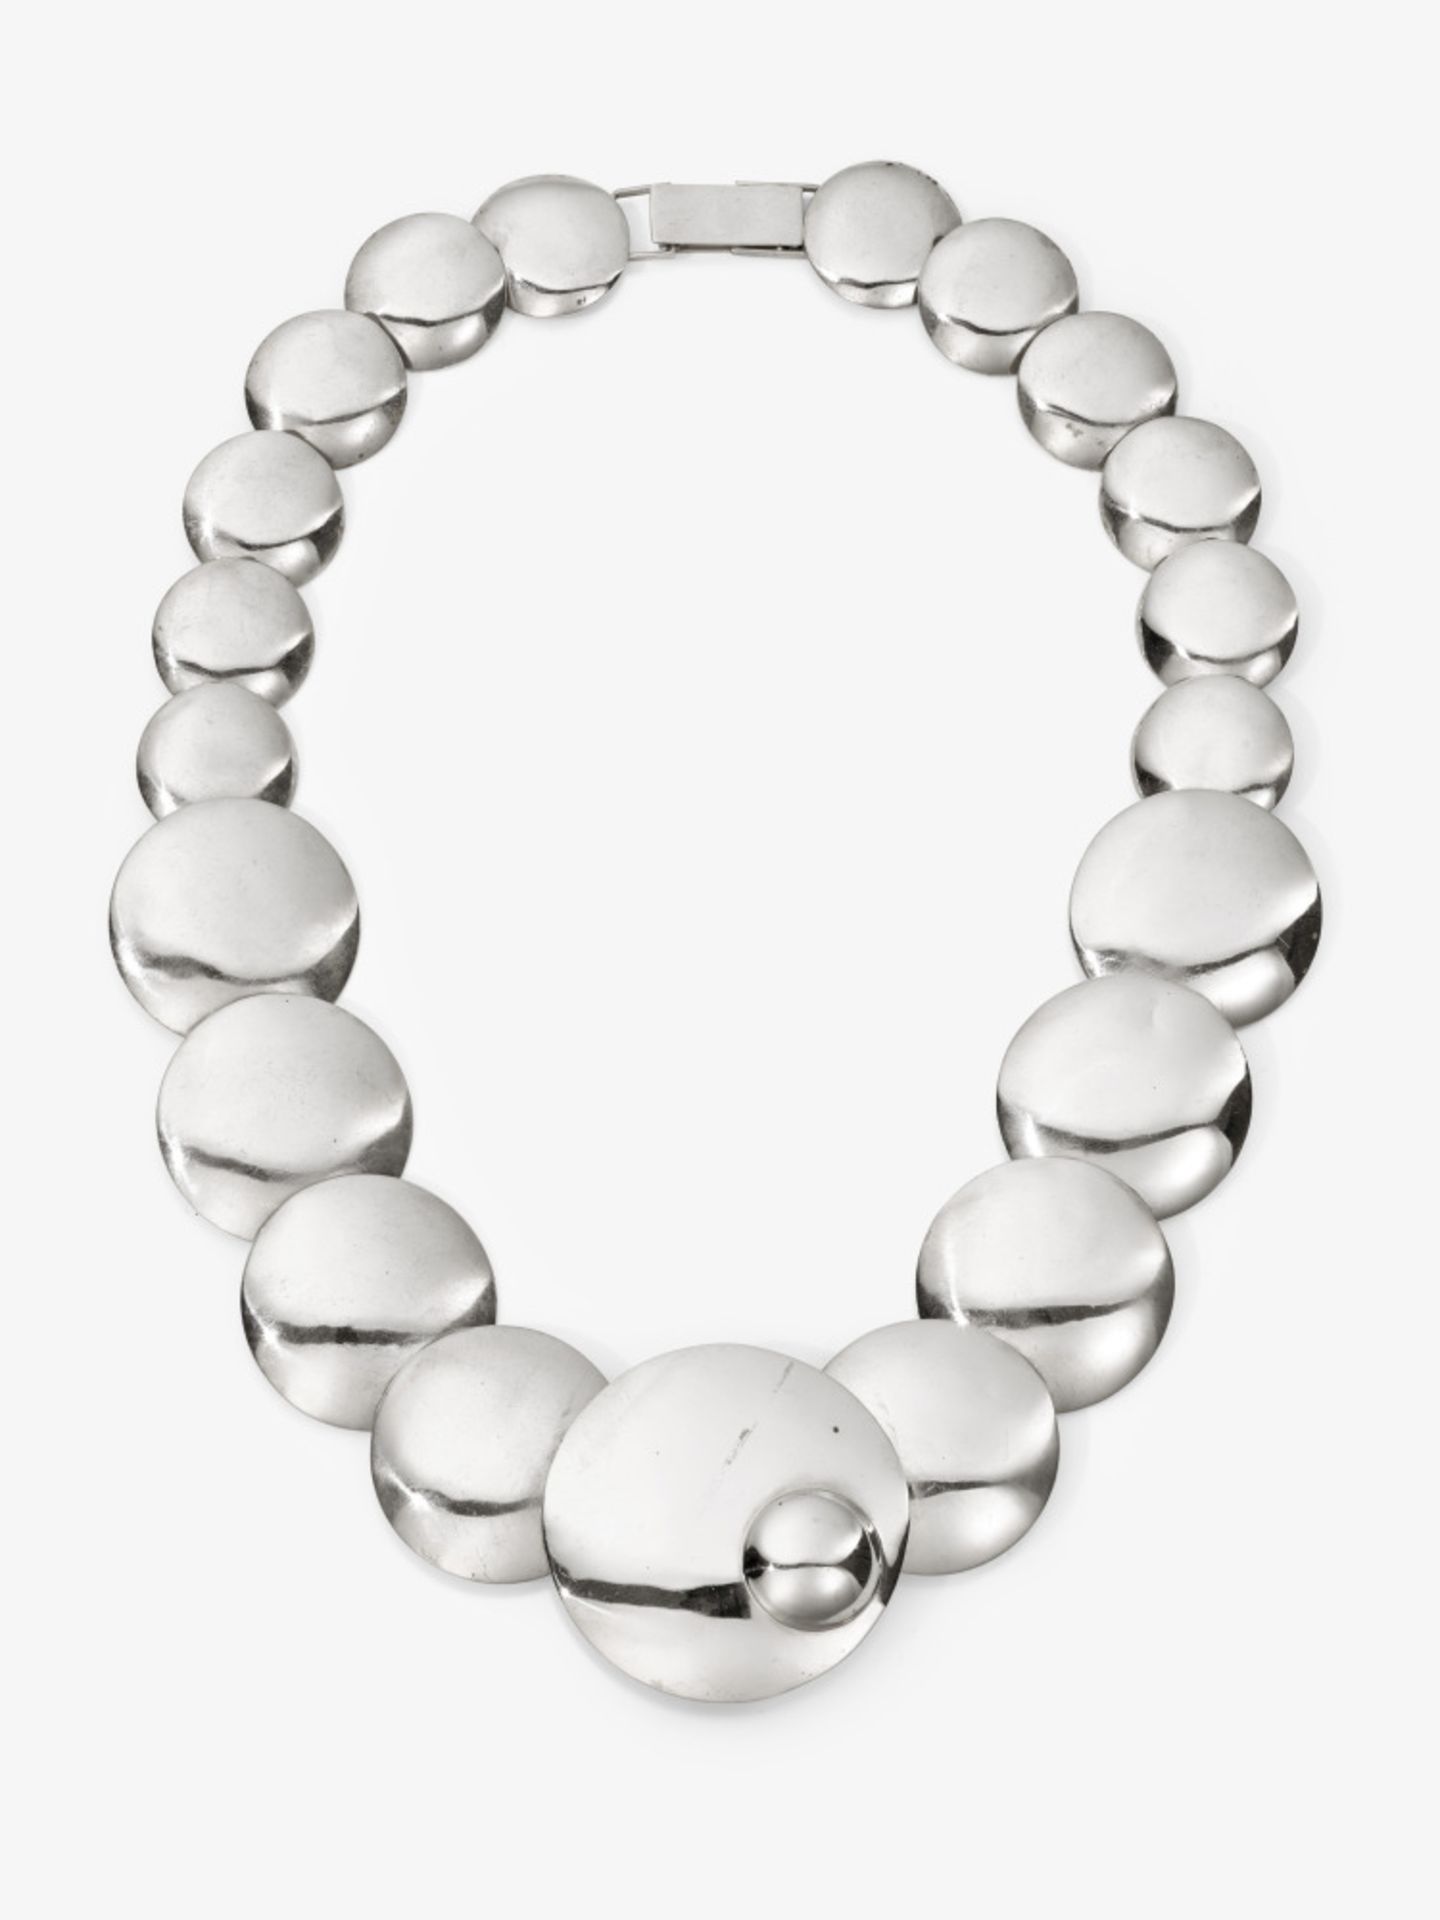 A chocker necklace made of high-gloss circles in sterling silver - Germany, probably Berlin 1920s - - Image 2 of 2